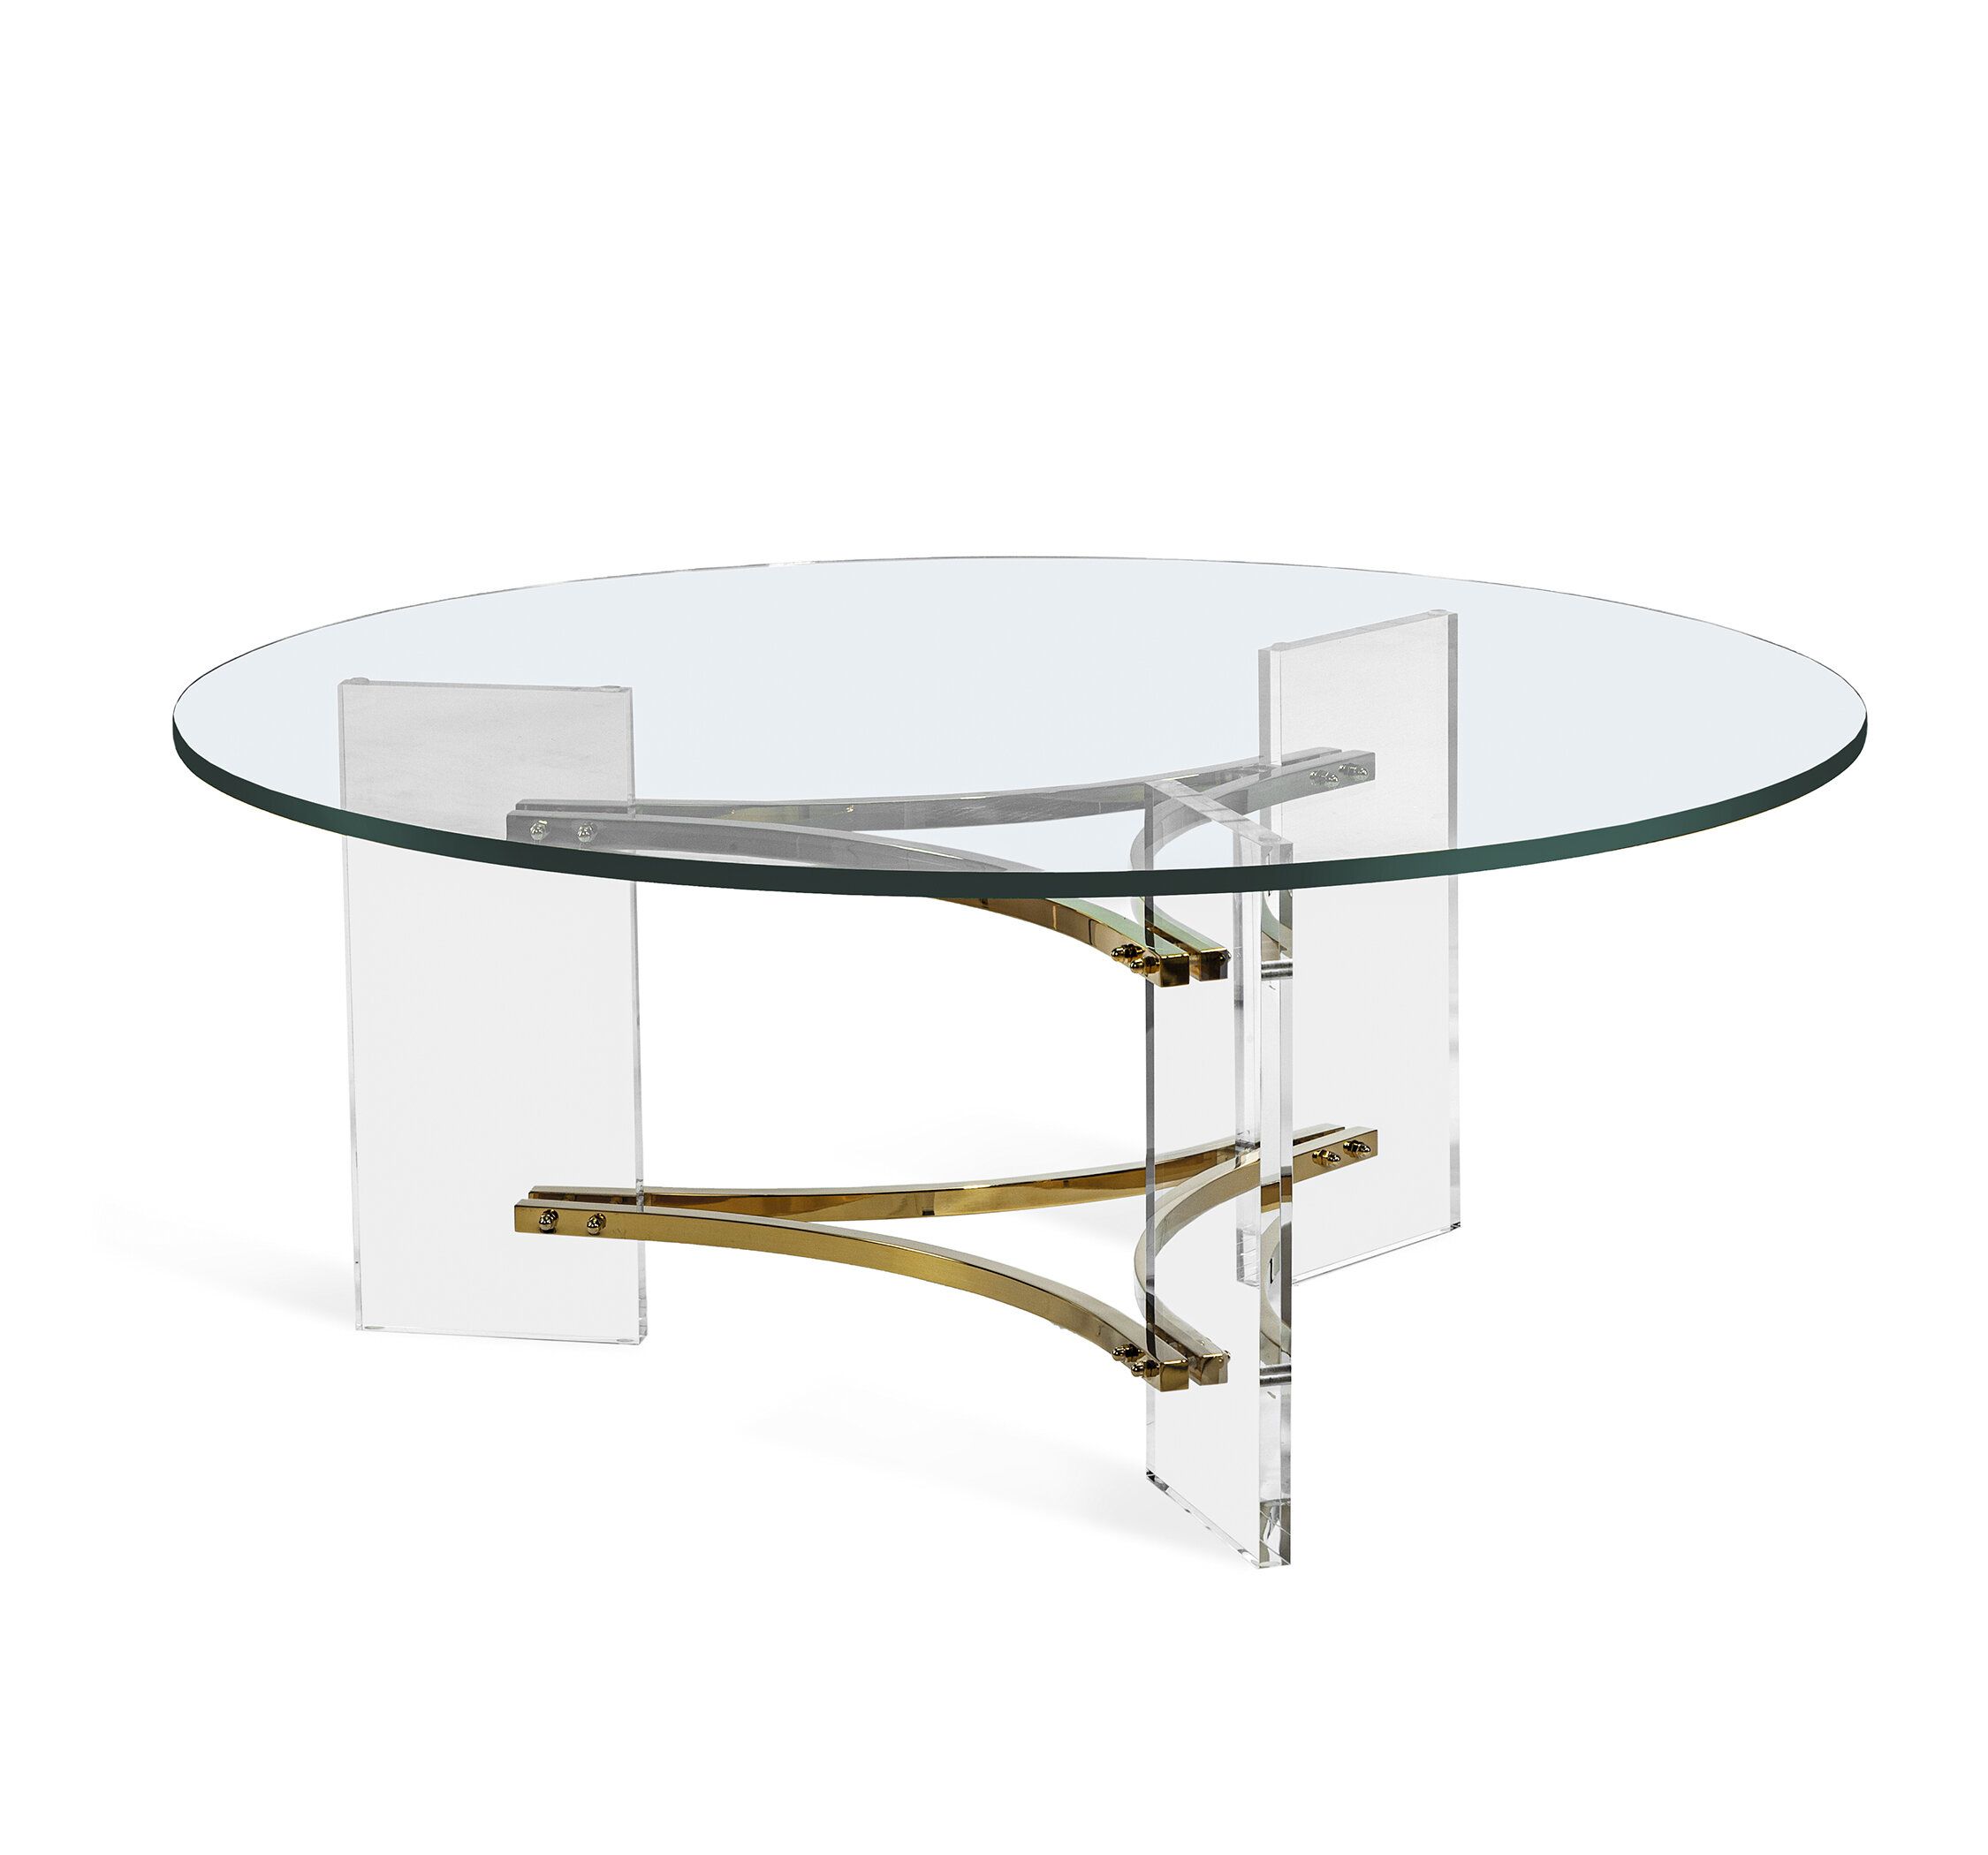 Interlude Tamara 3 Legs Coffee Table | Wayfair Inside Stainless Steel And Acrylic Coffee Tables (View 8 of 15)